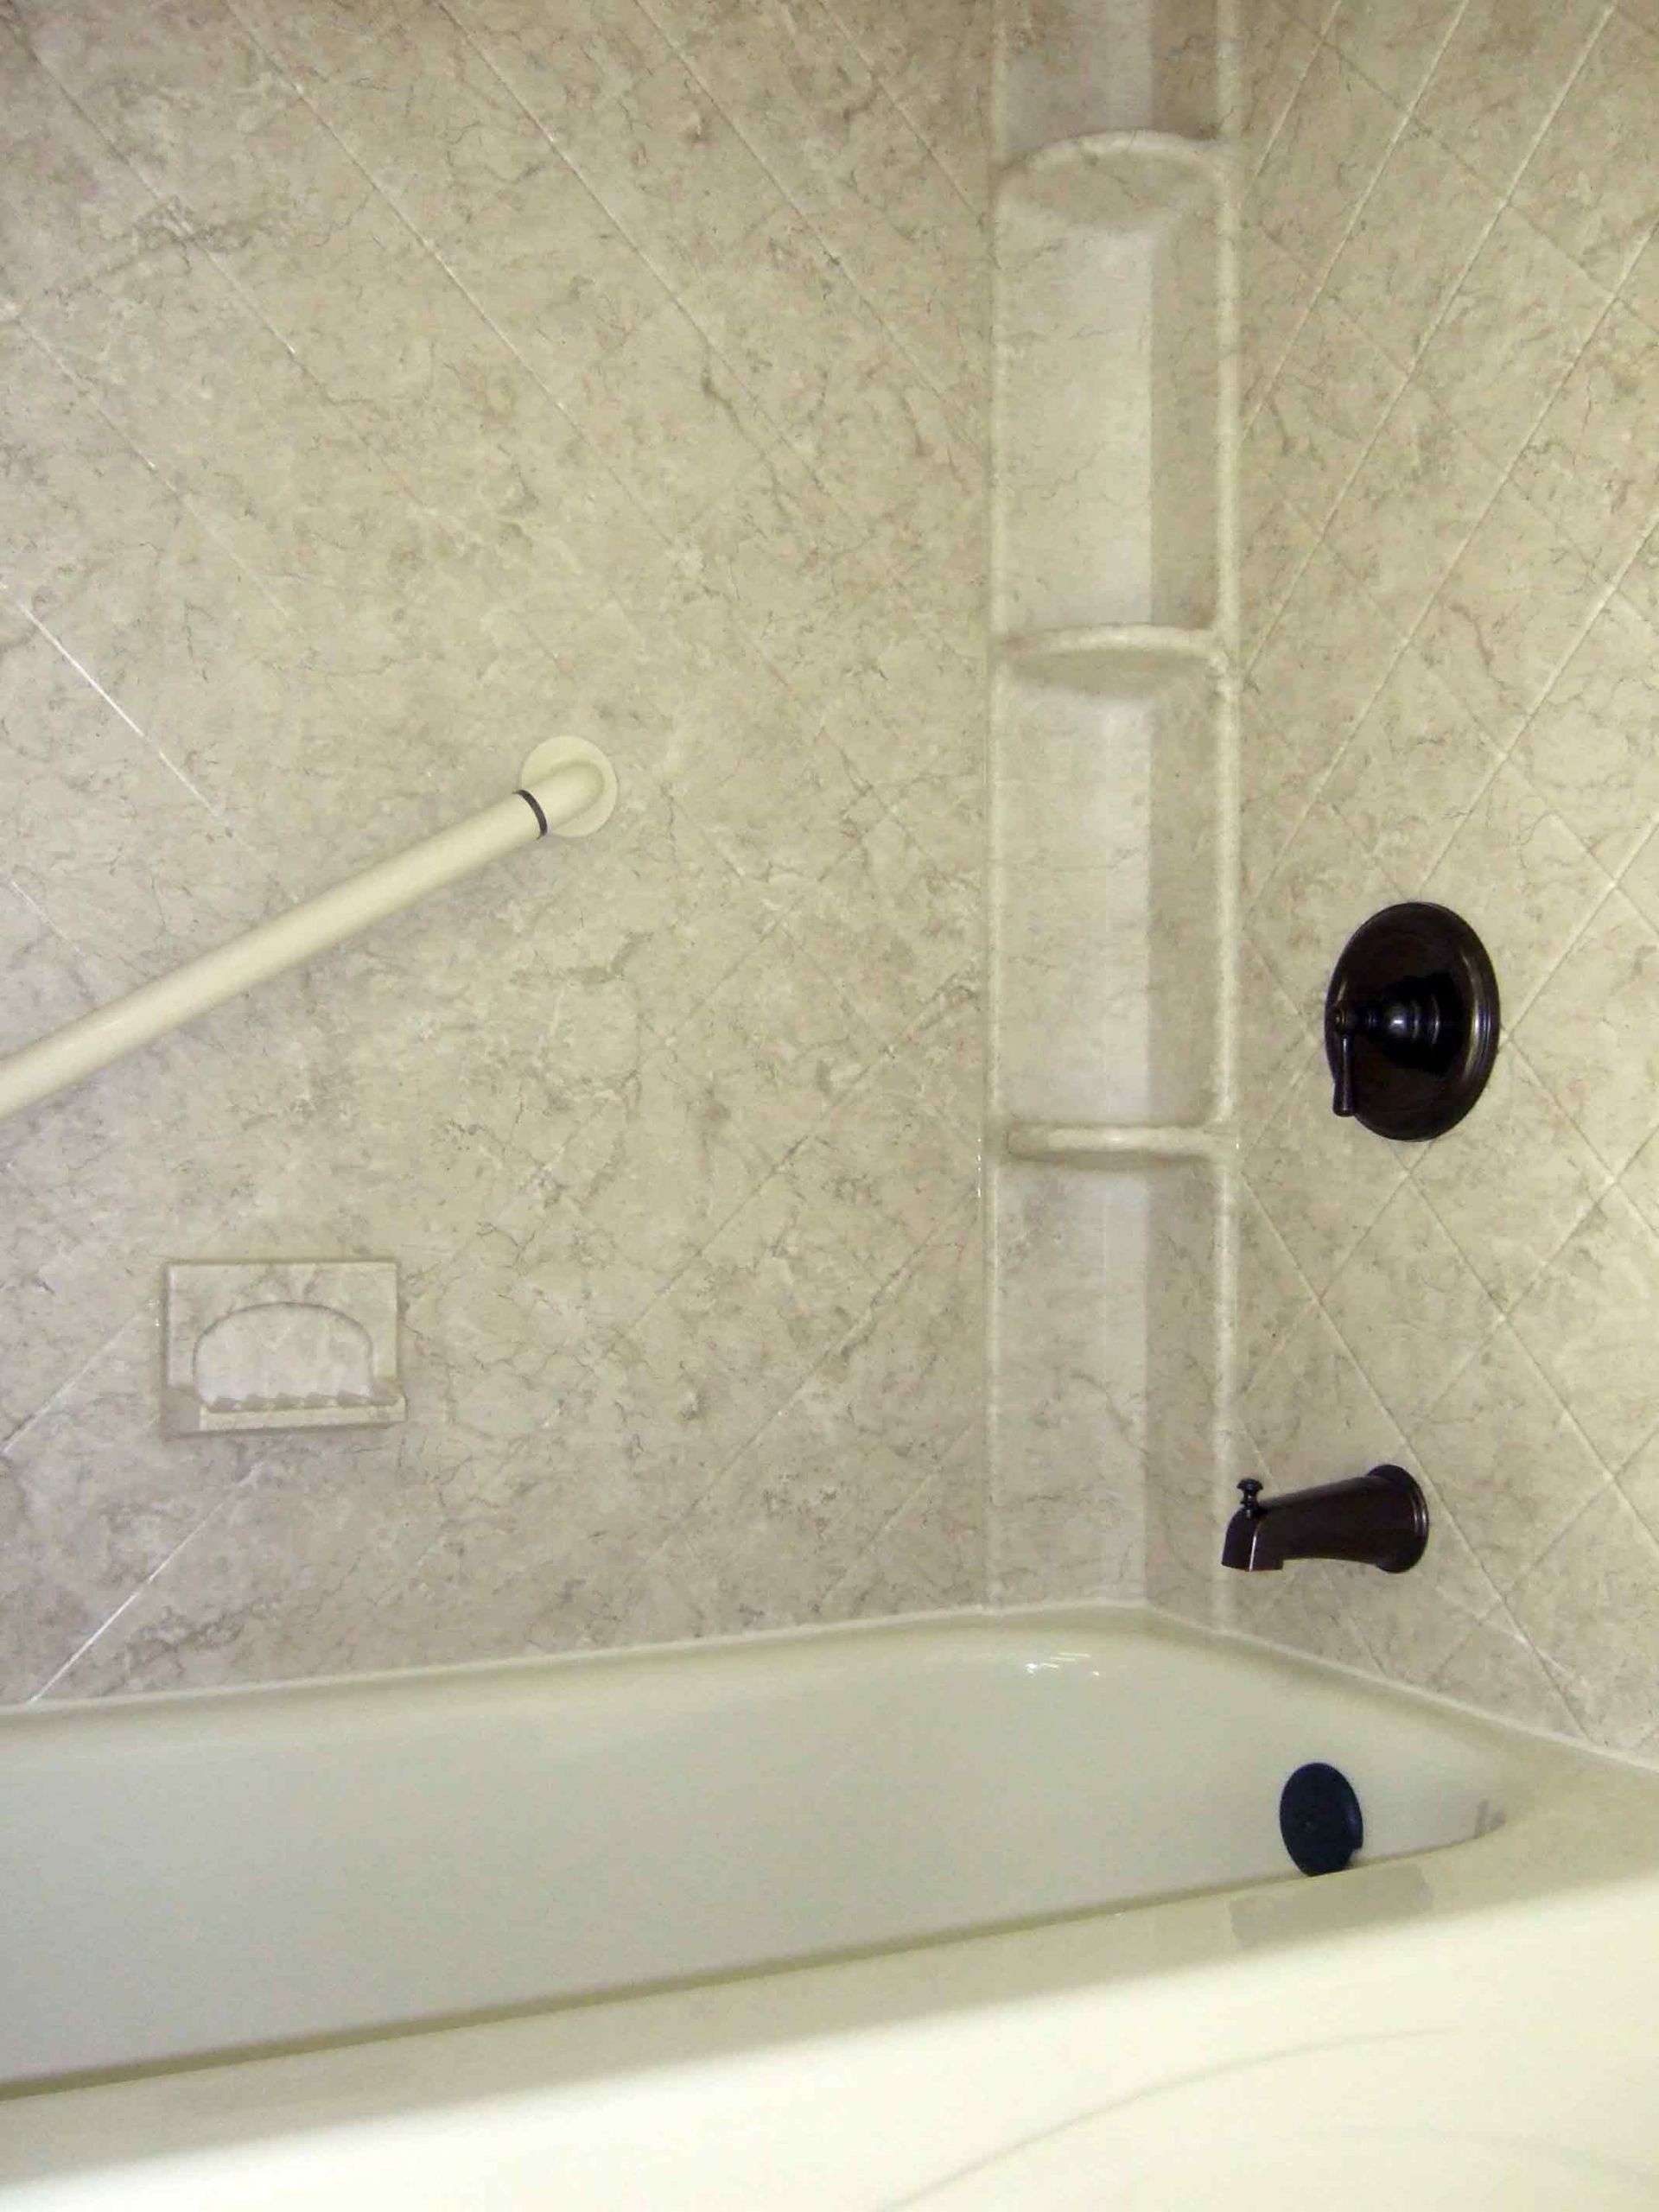 Fiberglass Bathroom Wall Panels
 Acrylic shower walls with Breccia pattern and shower caddy